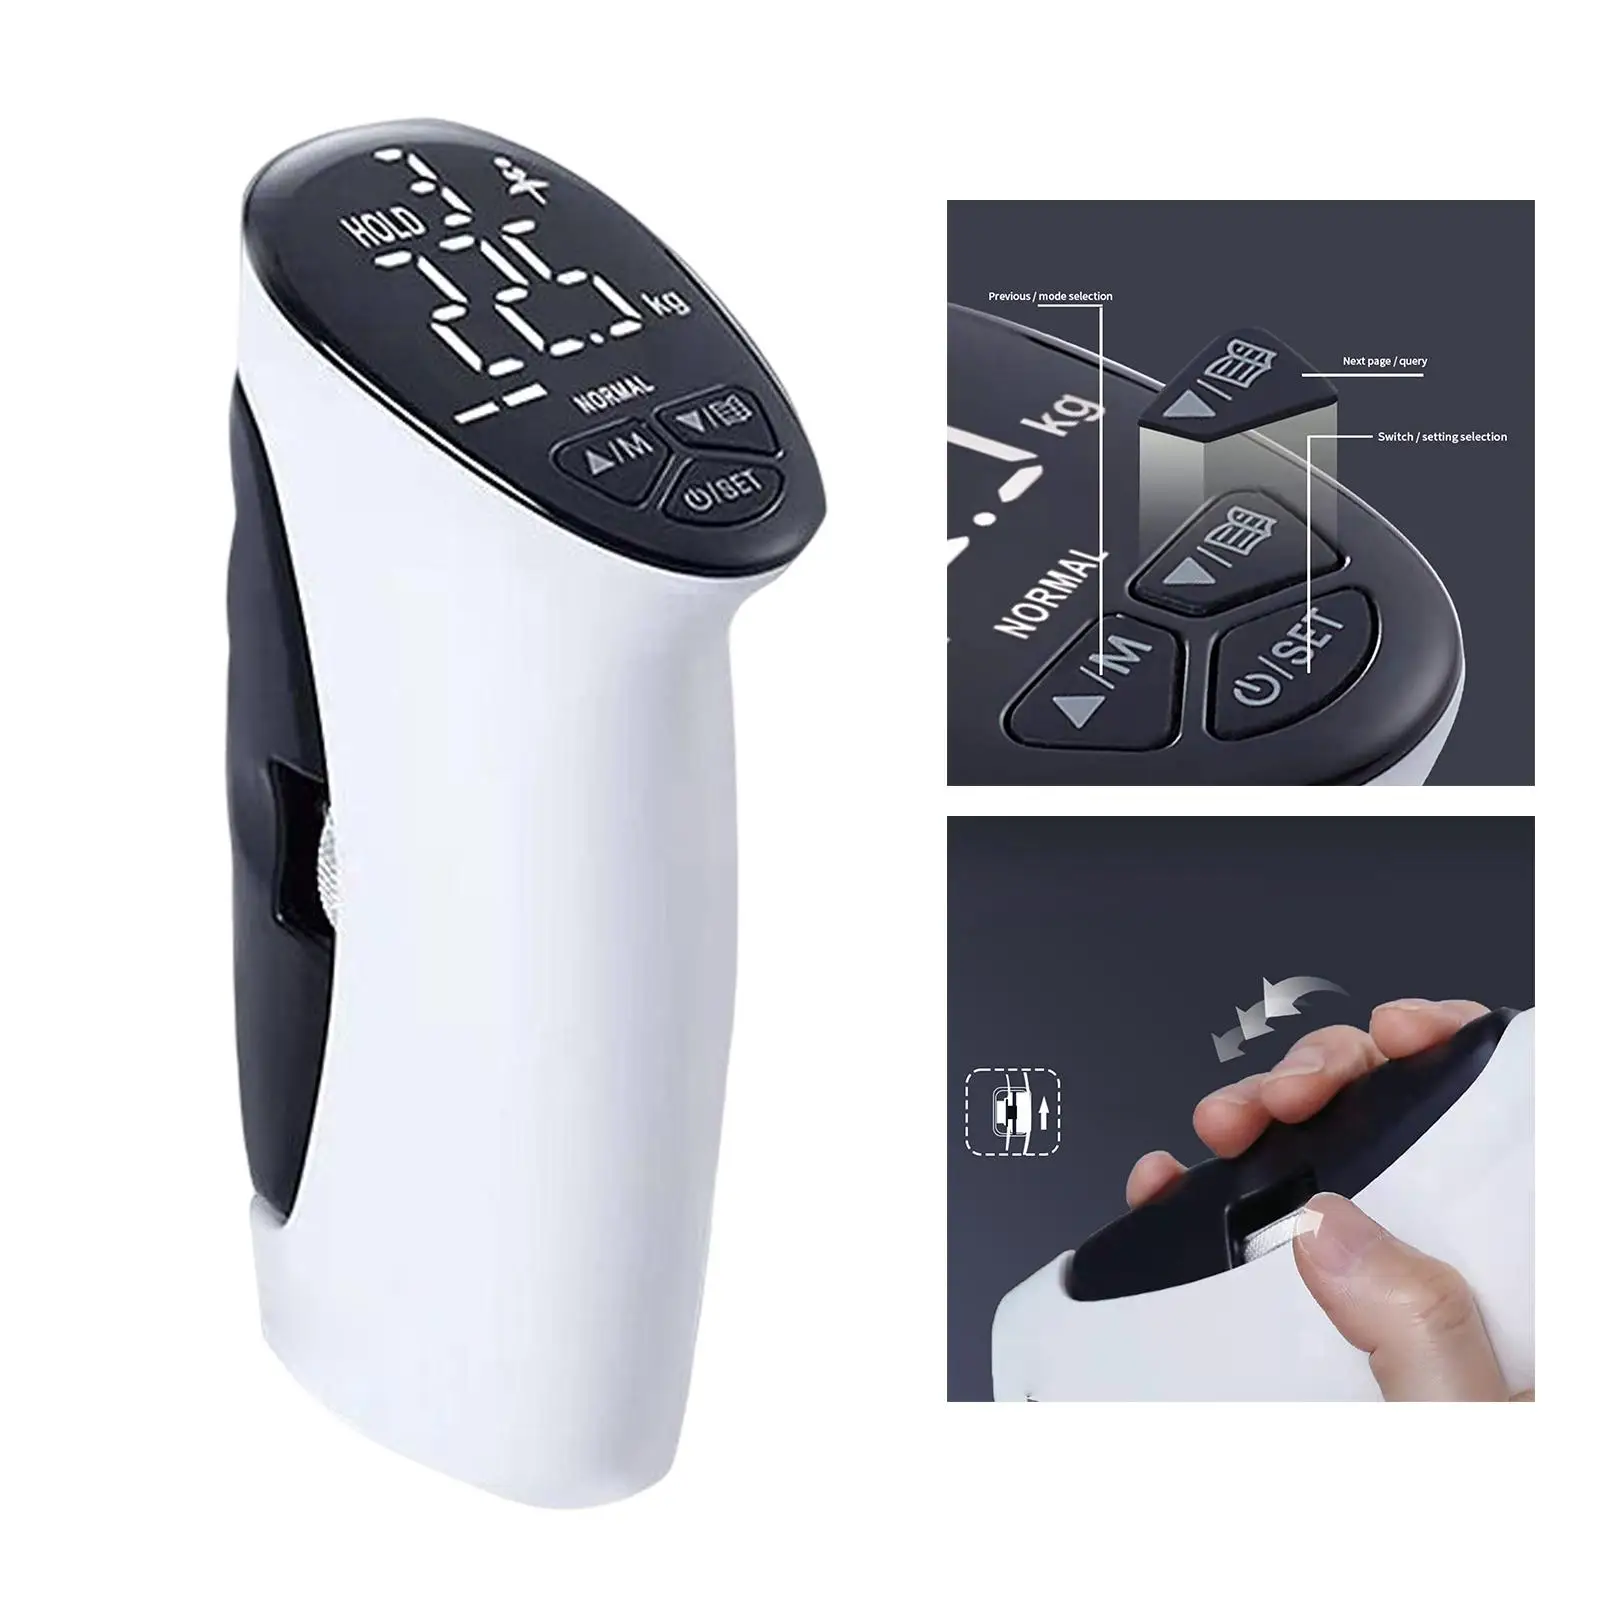 LED Hand Grip Strength Trainerhand Grip Exerciserhand Dynamometer Grip* Hand Grip Measuring Tool for Sport Gym Training Workout